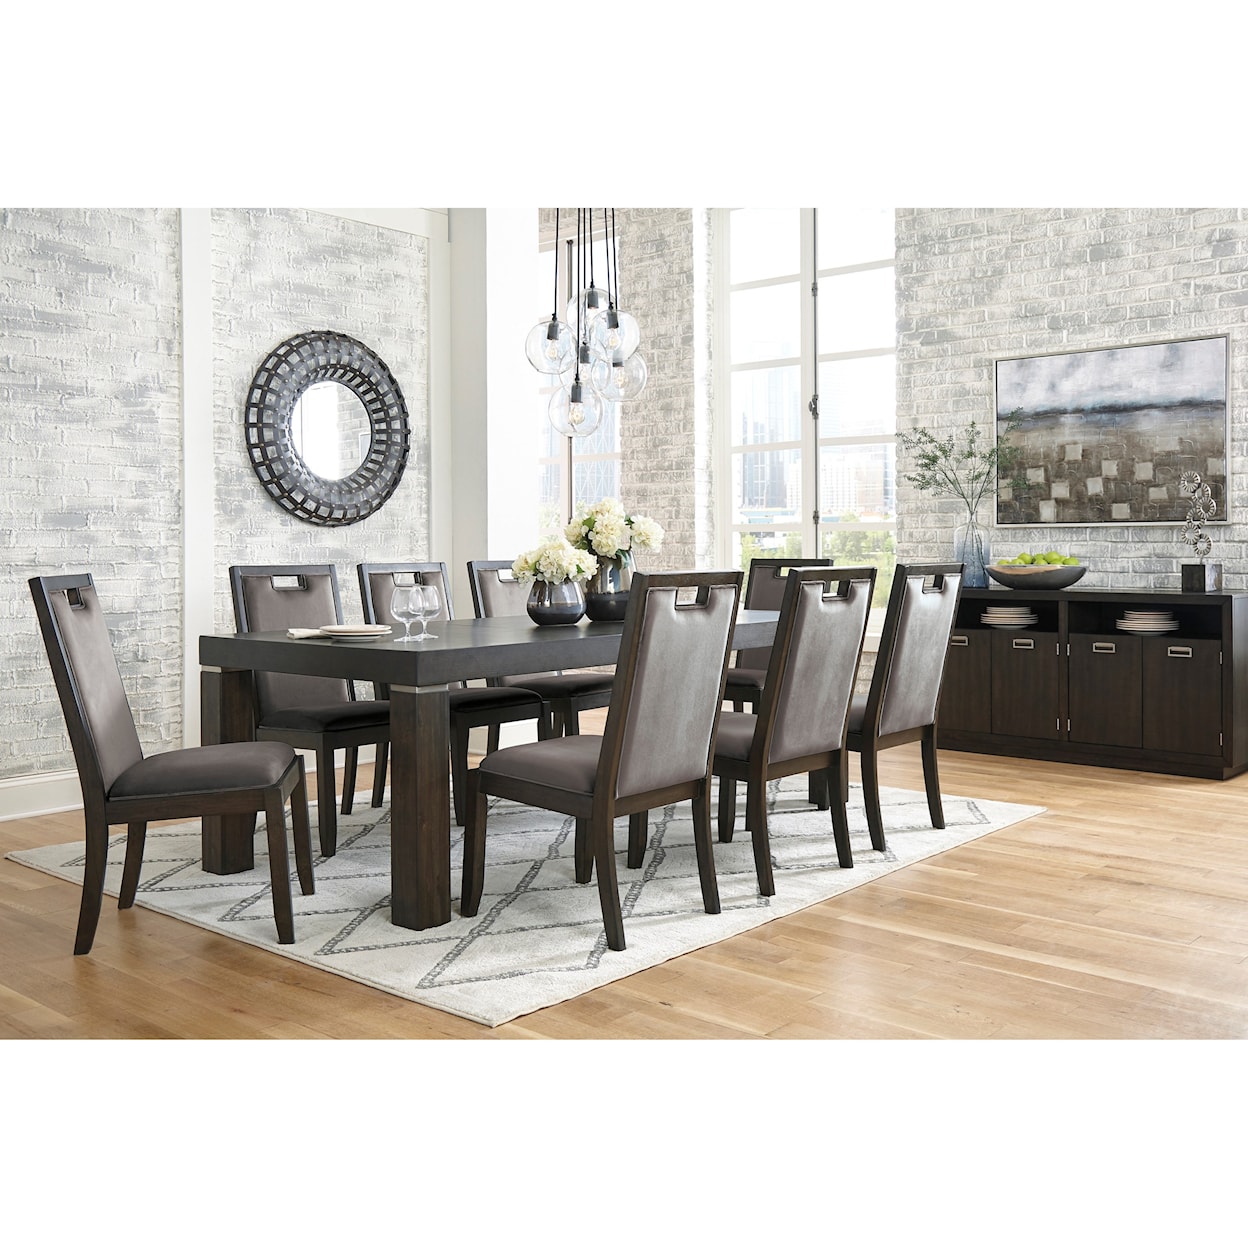 Ashley Signature Design Hyndell Rectangular Dining Room Extension Table